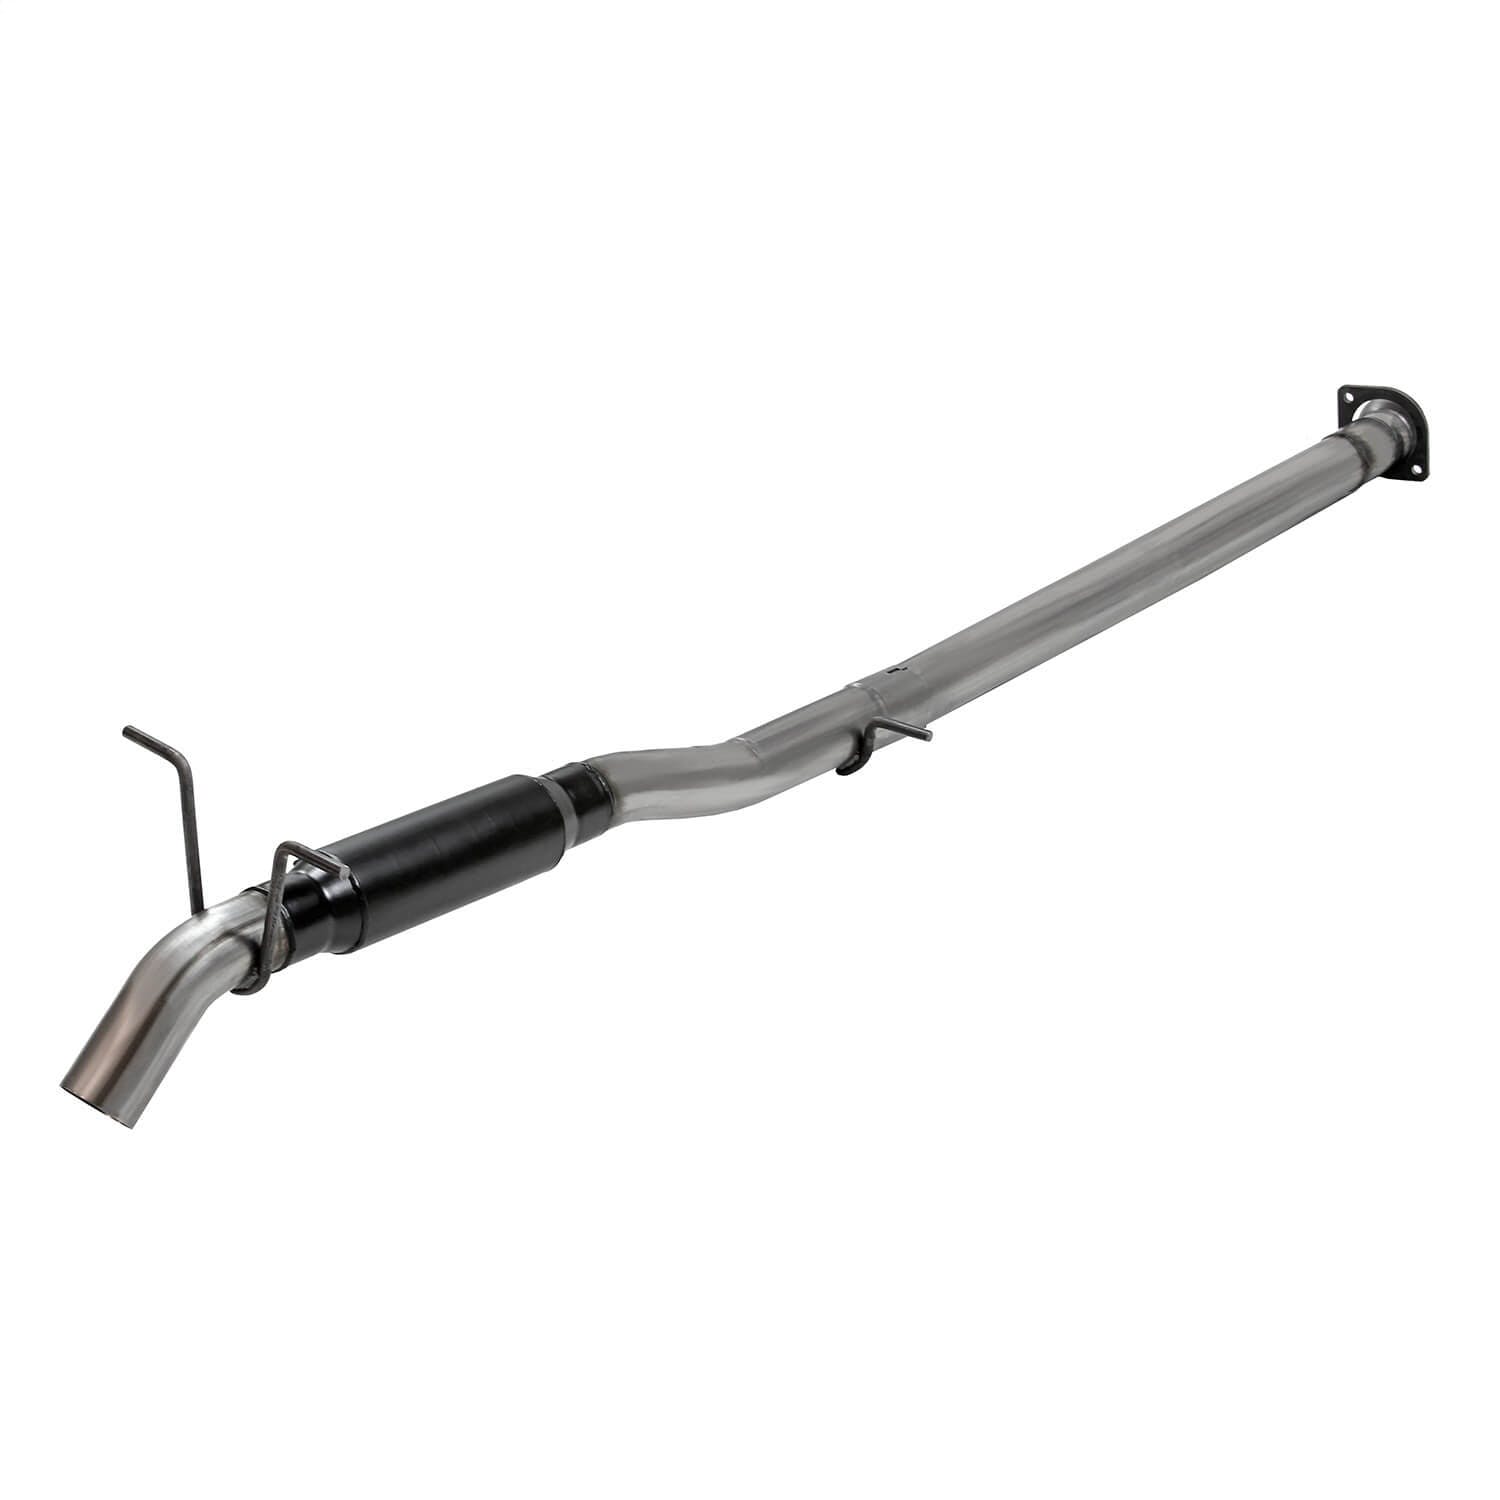 Flowmaster 817964 Outlaw Extreme Cat Back Exhaust System